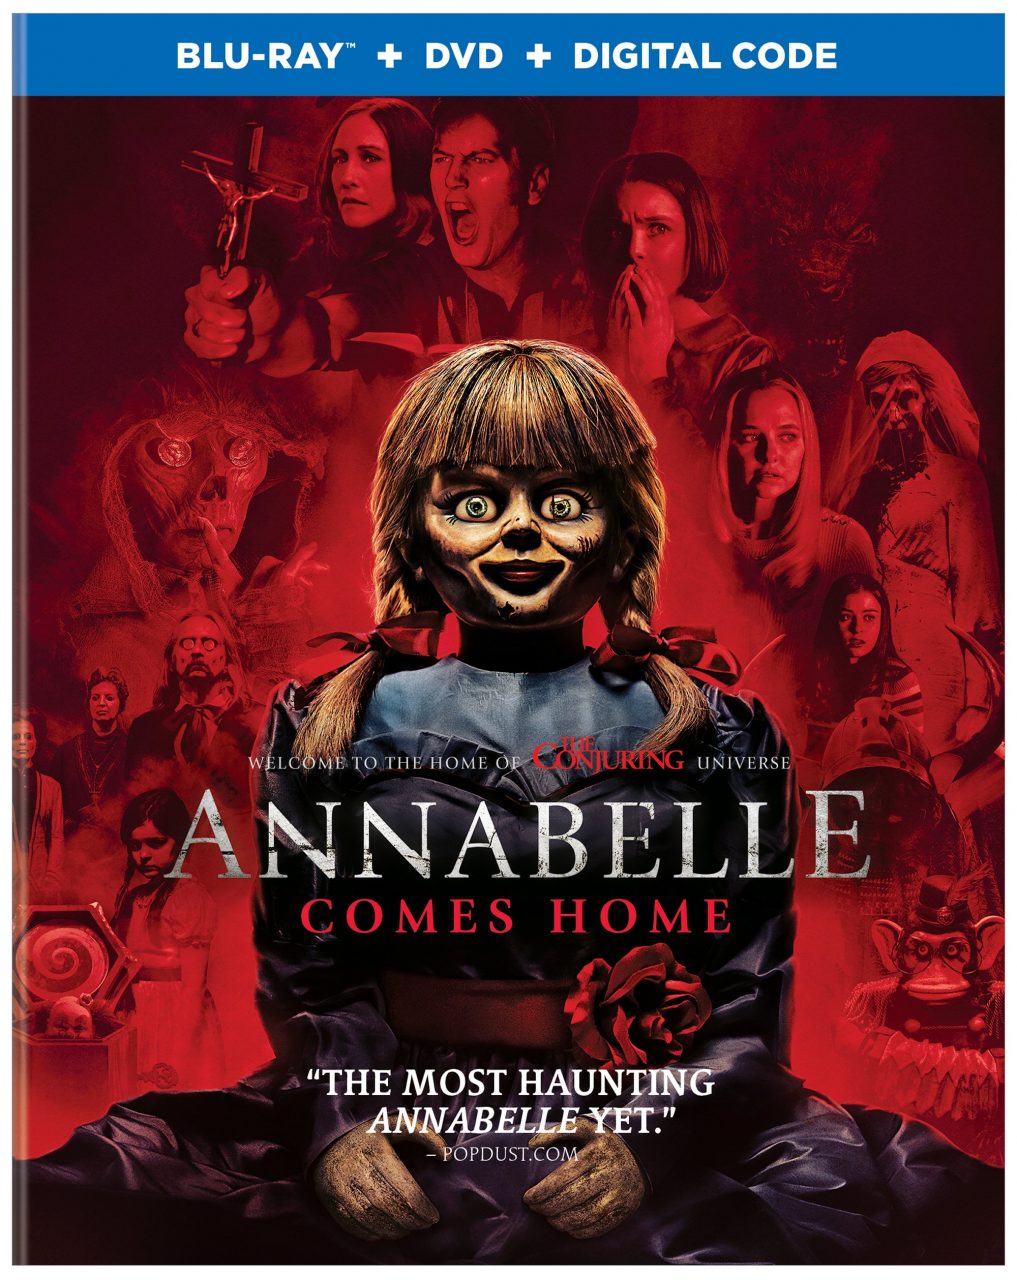 Annabelle Comes Home Blu-Ray Combo Pack cover (Warner Bros. Home Entertainment)